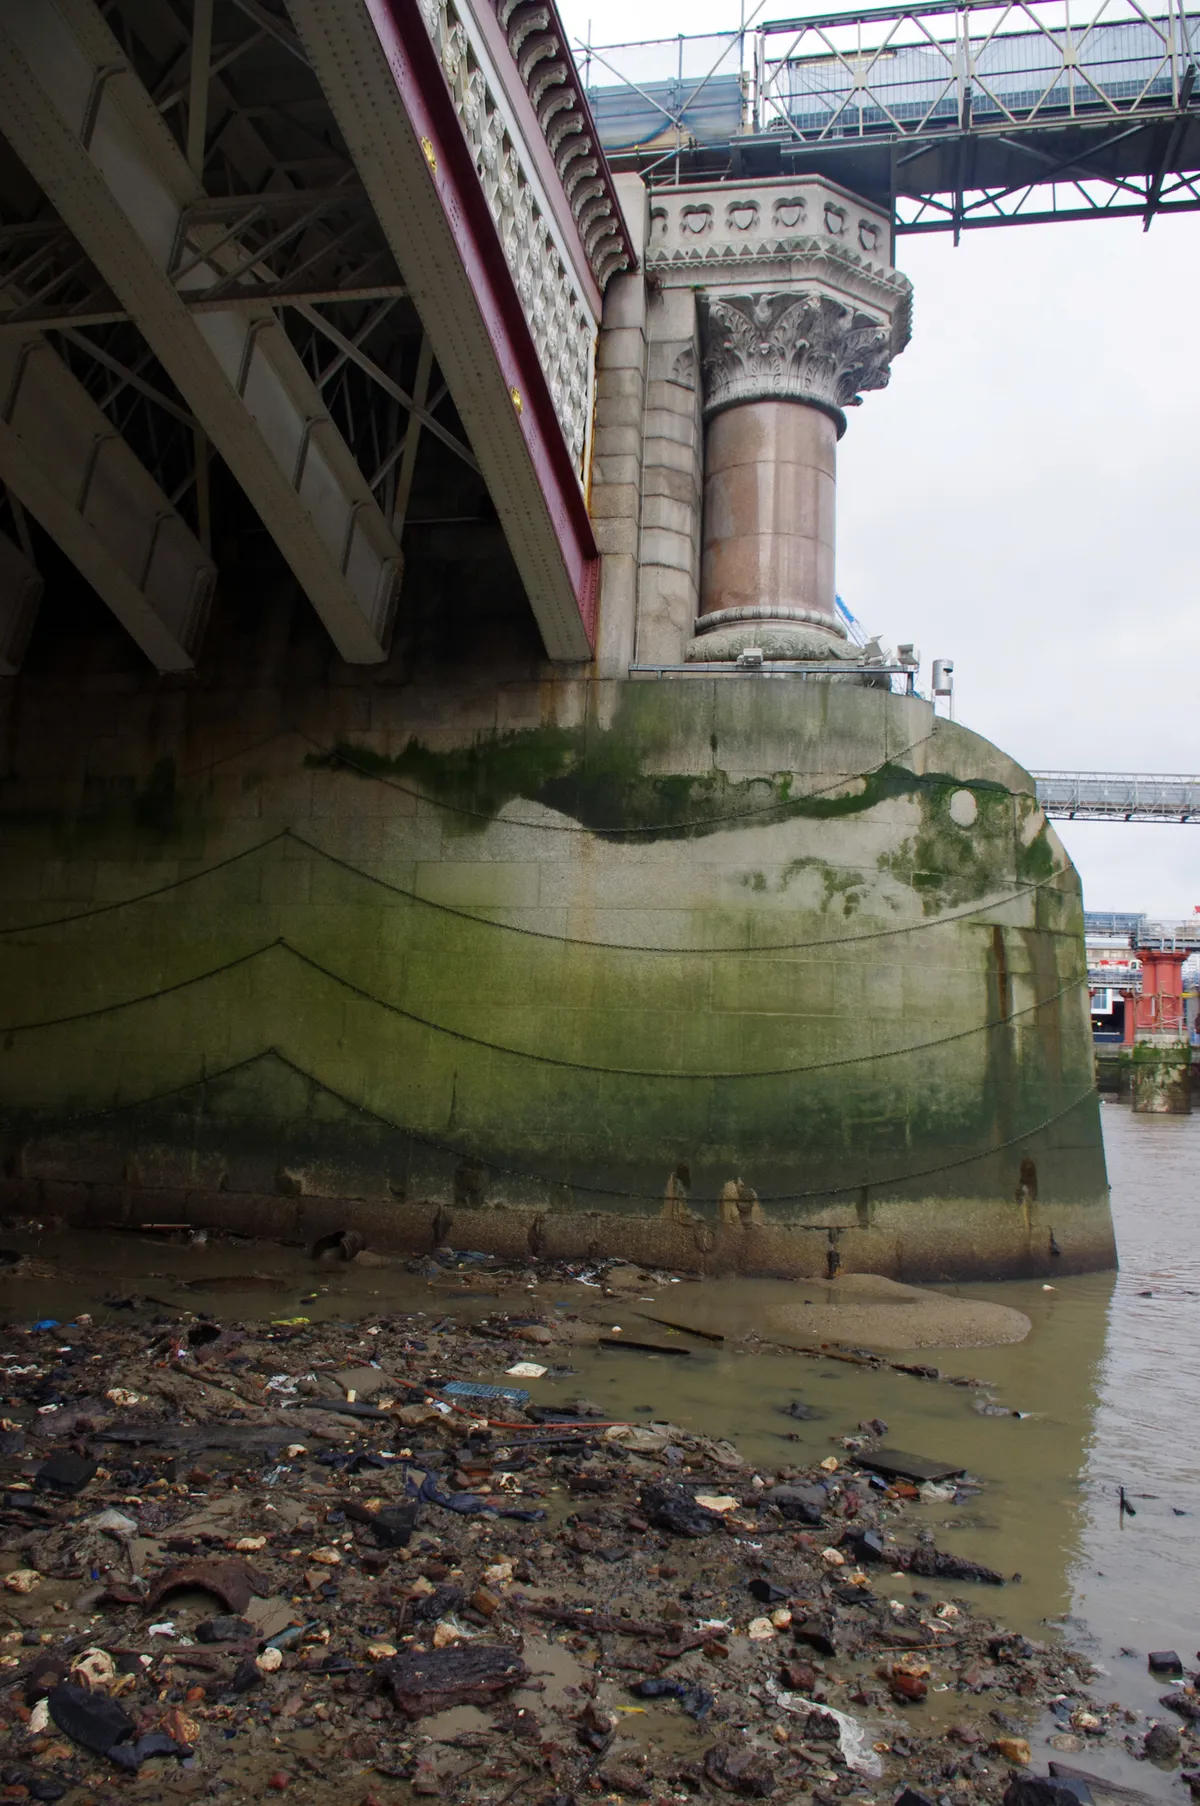 Pylon of Blackfriars Bridge at low tide on the River Thames, foreshore strewn with rusted metal, plastic, building rubble and other trash. © Simon McGill/Getty